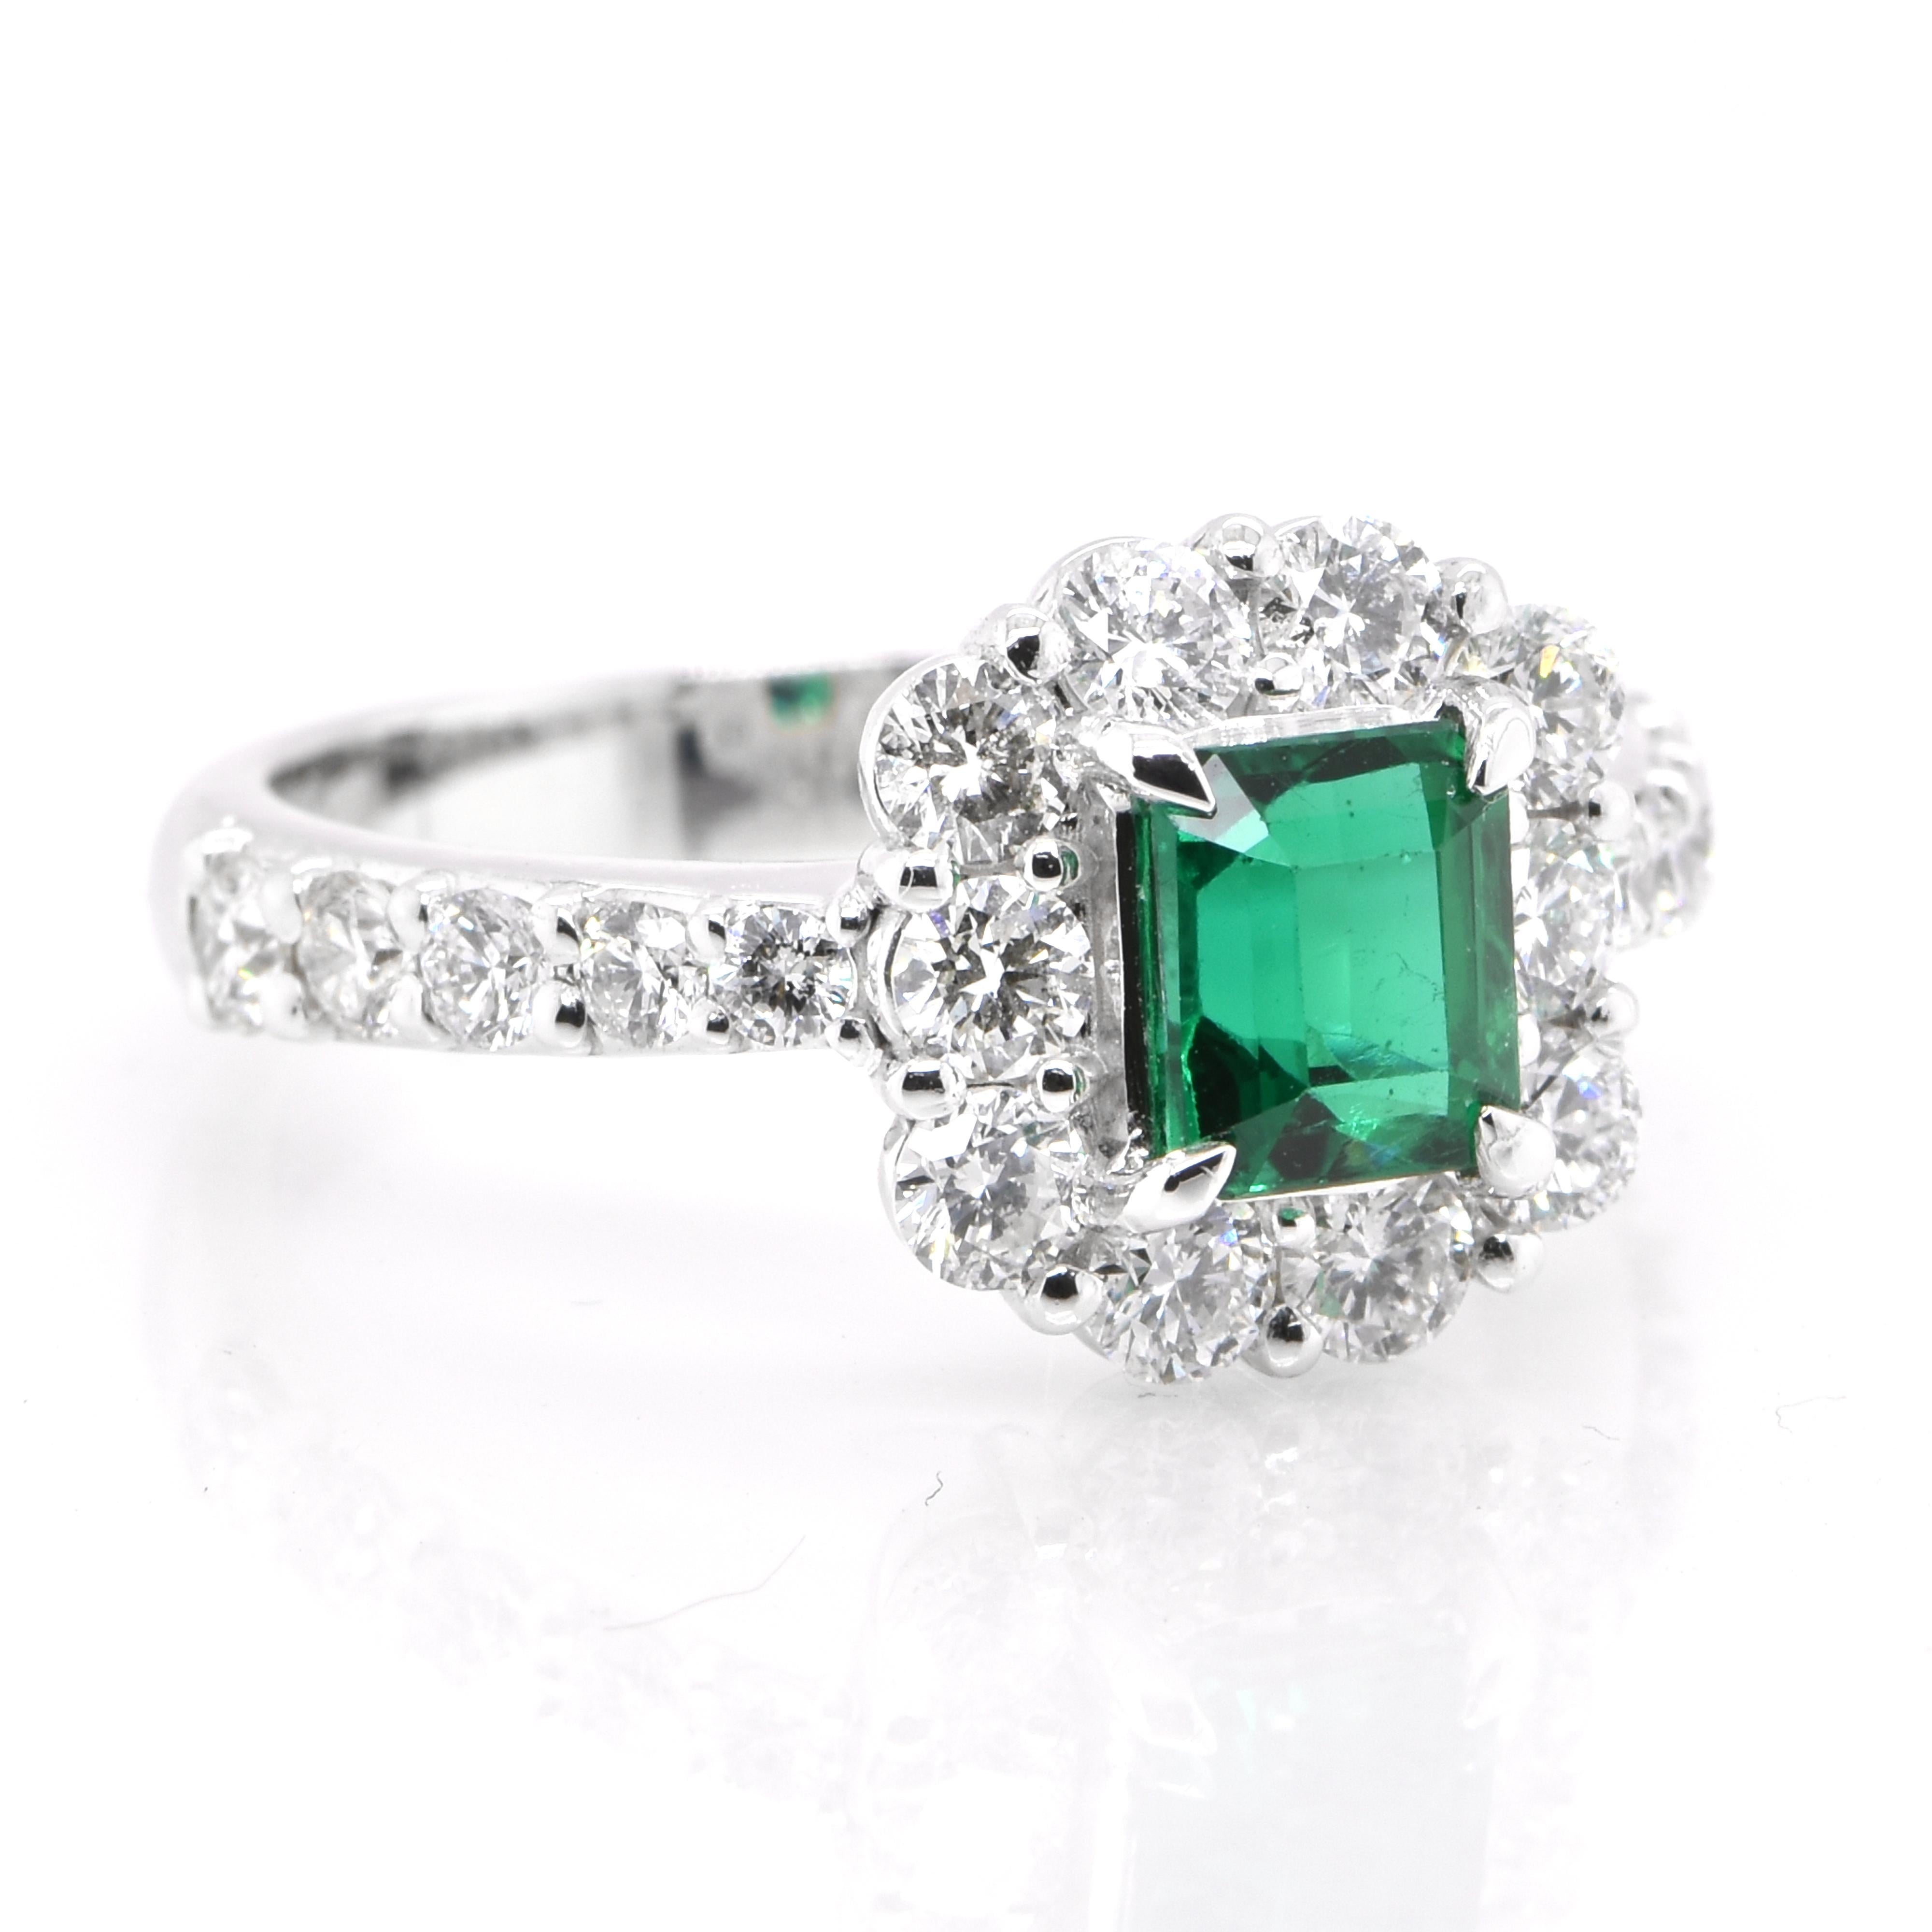 Modern 0.89 Carat Vivid Green Emerald and Diamond Halo Ring Set in Platinum For Sale